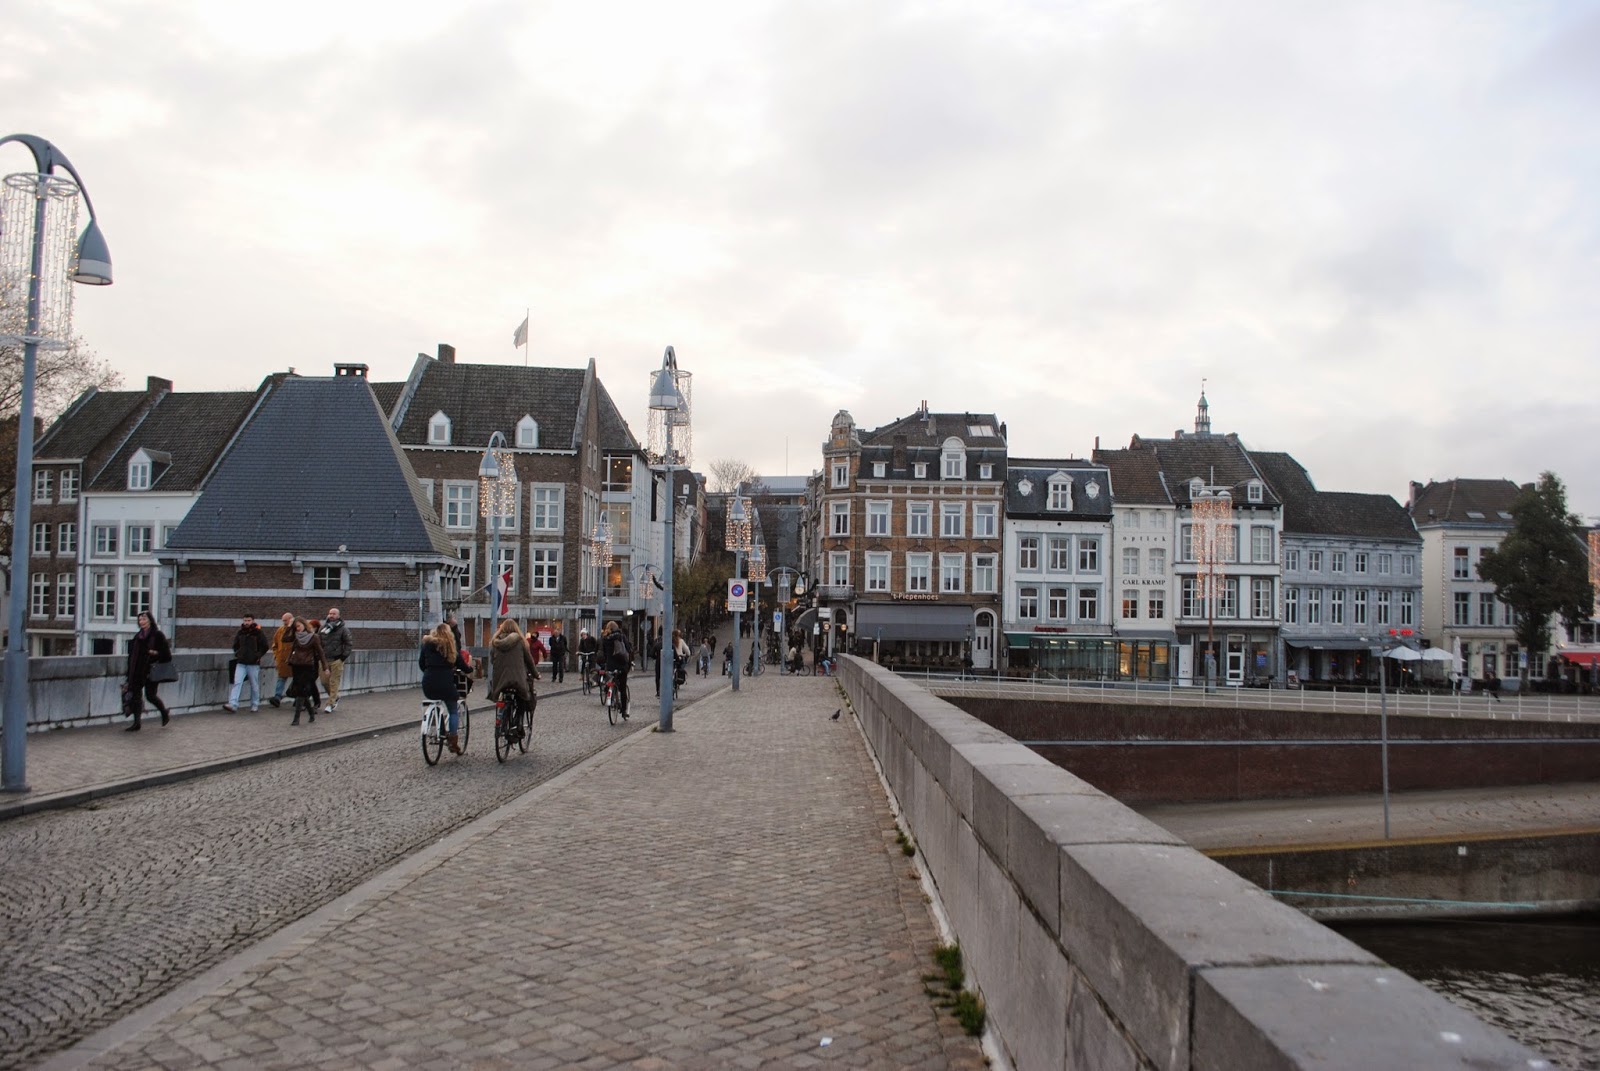 Bridge and buildings in Maastricht, the Netherlands.